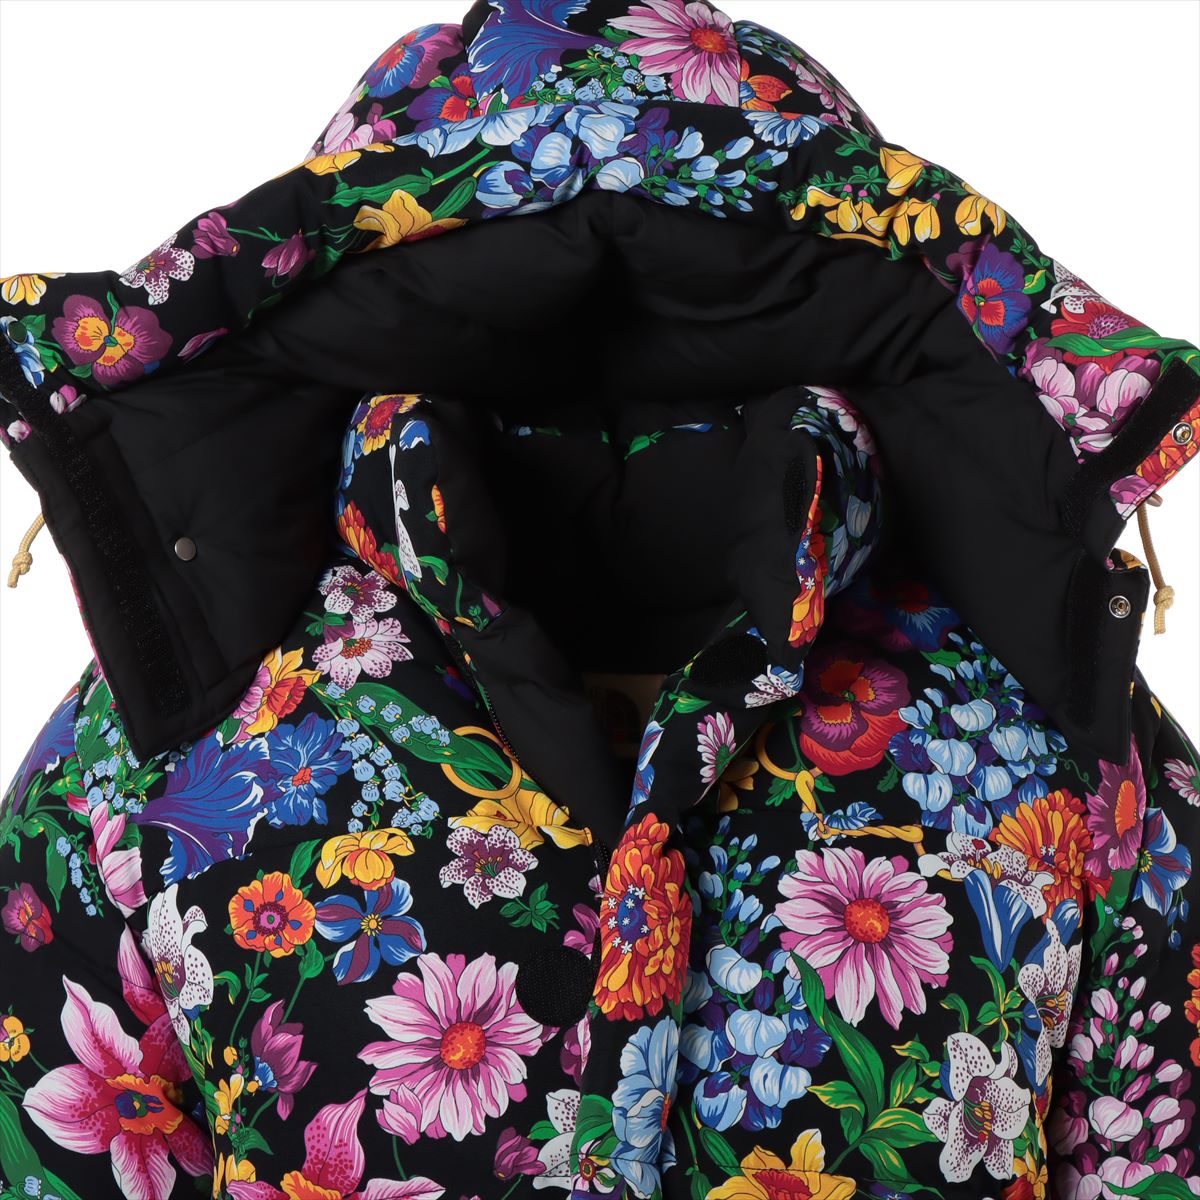 Gucci x North Face Polyester & nylon Down jacket M Multicolor  648858 floral Detachable hood